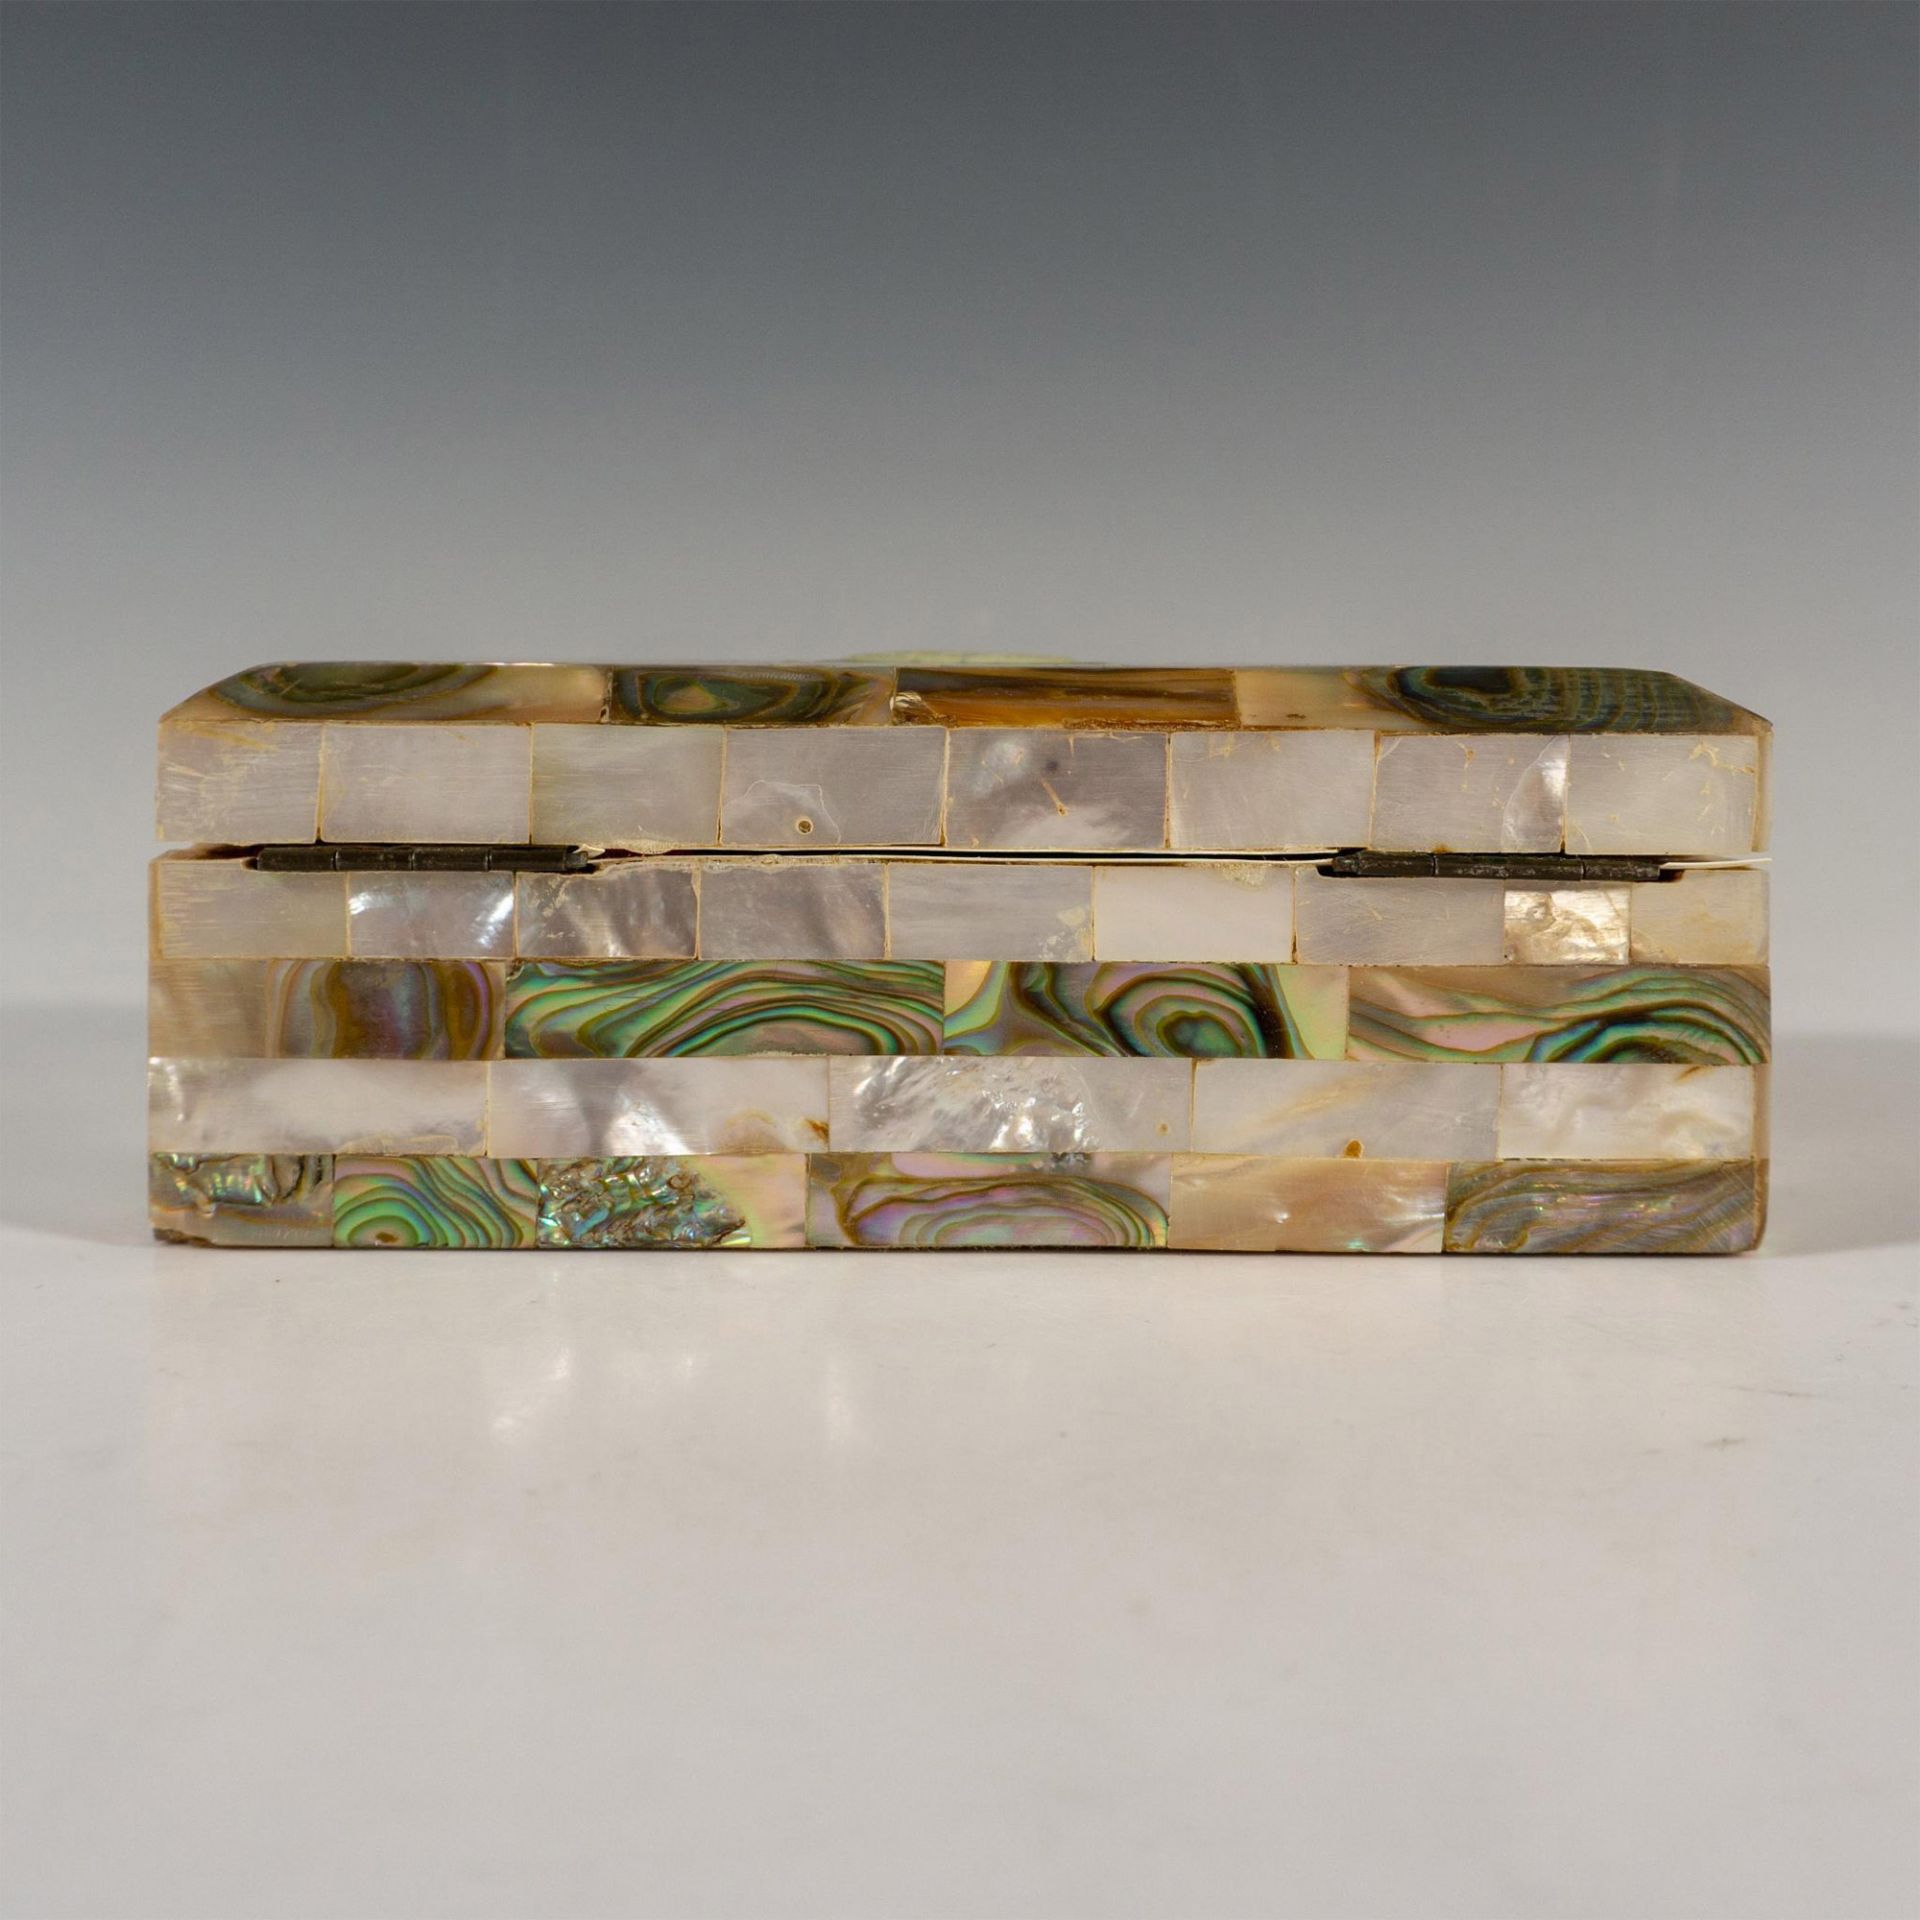 Vintage Mother of Pearl Judaica Jewelry Box - Image 3 of 5